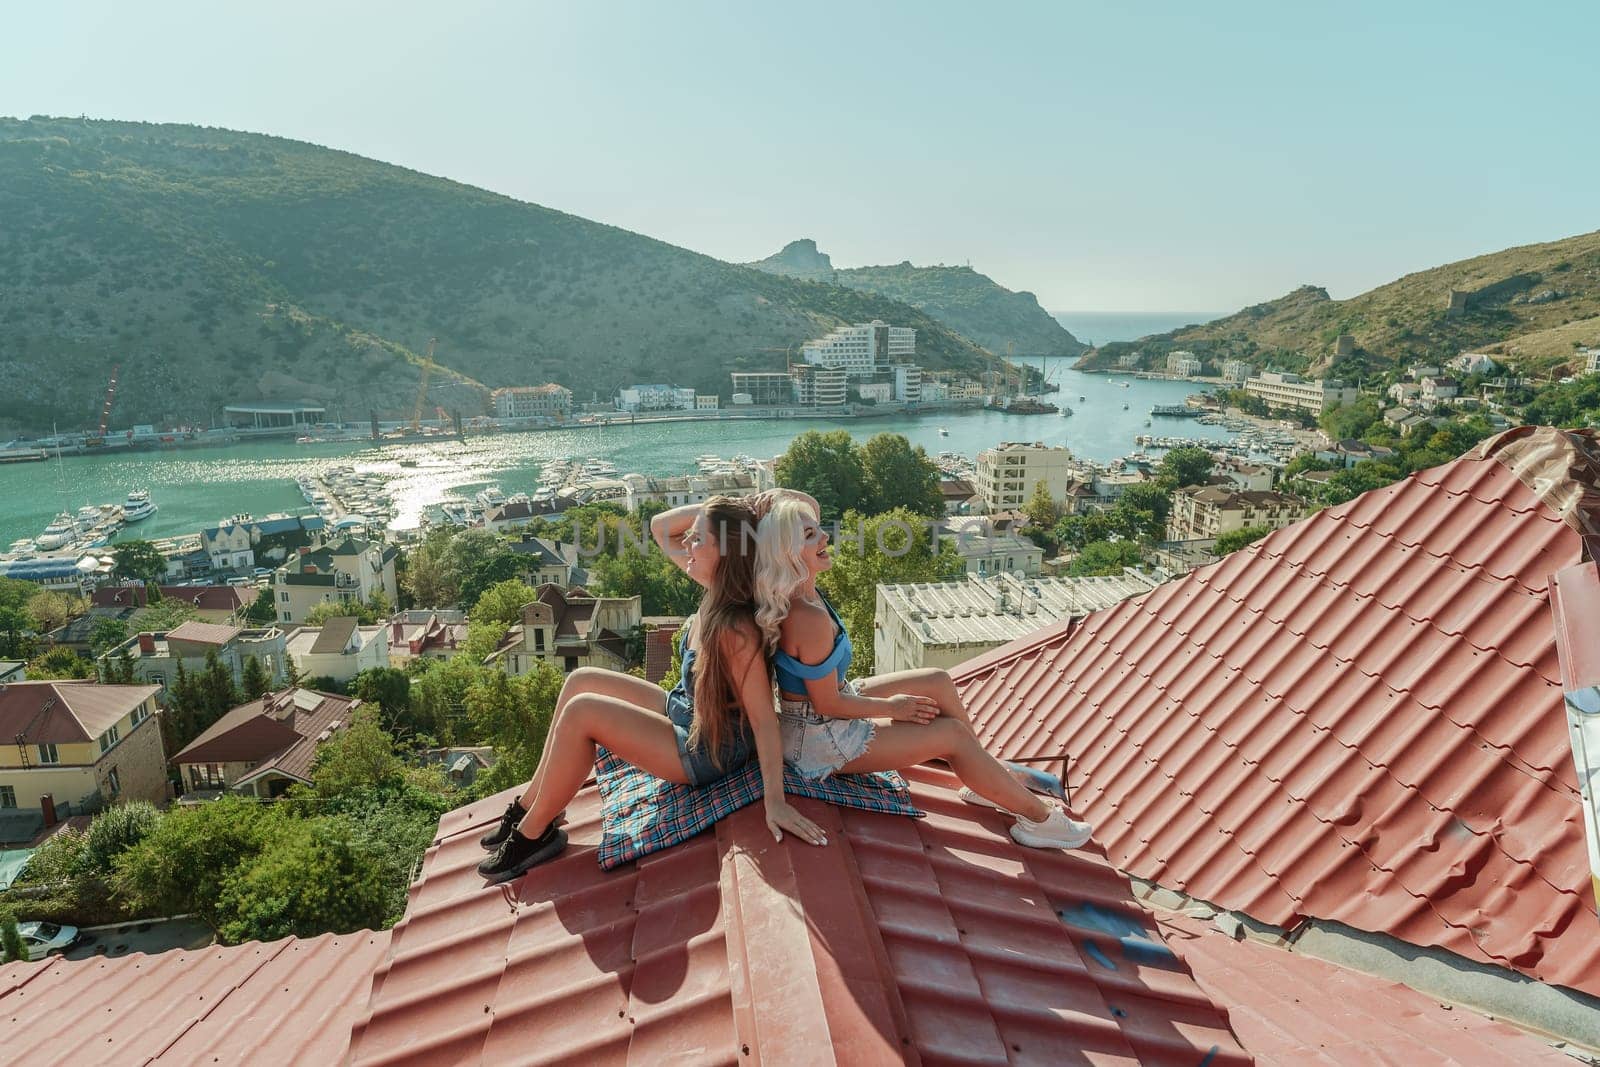 Two women sitting on a red roof, enjoying the view of the town and the sea. Rooftop vantage point. In the background, there are several boats visible on the water, adding to the picturesque scene. by Matiunina